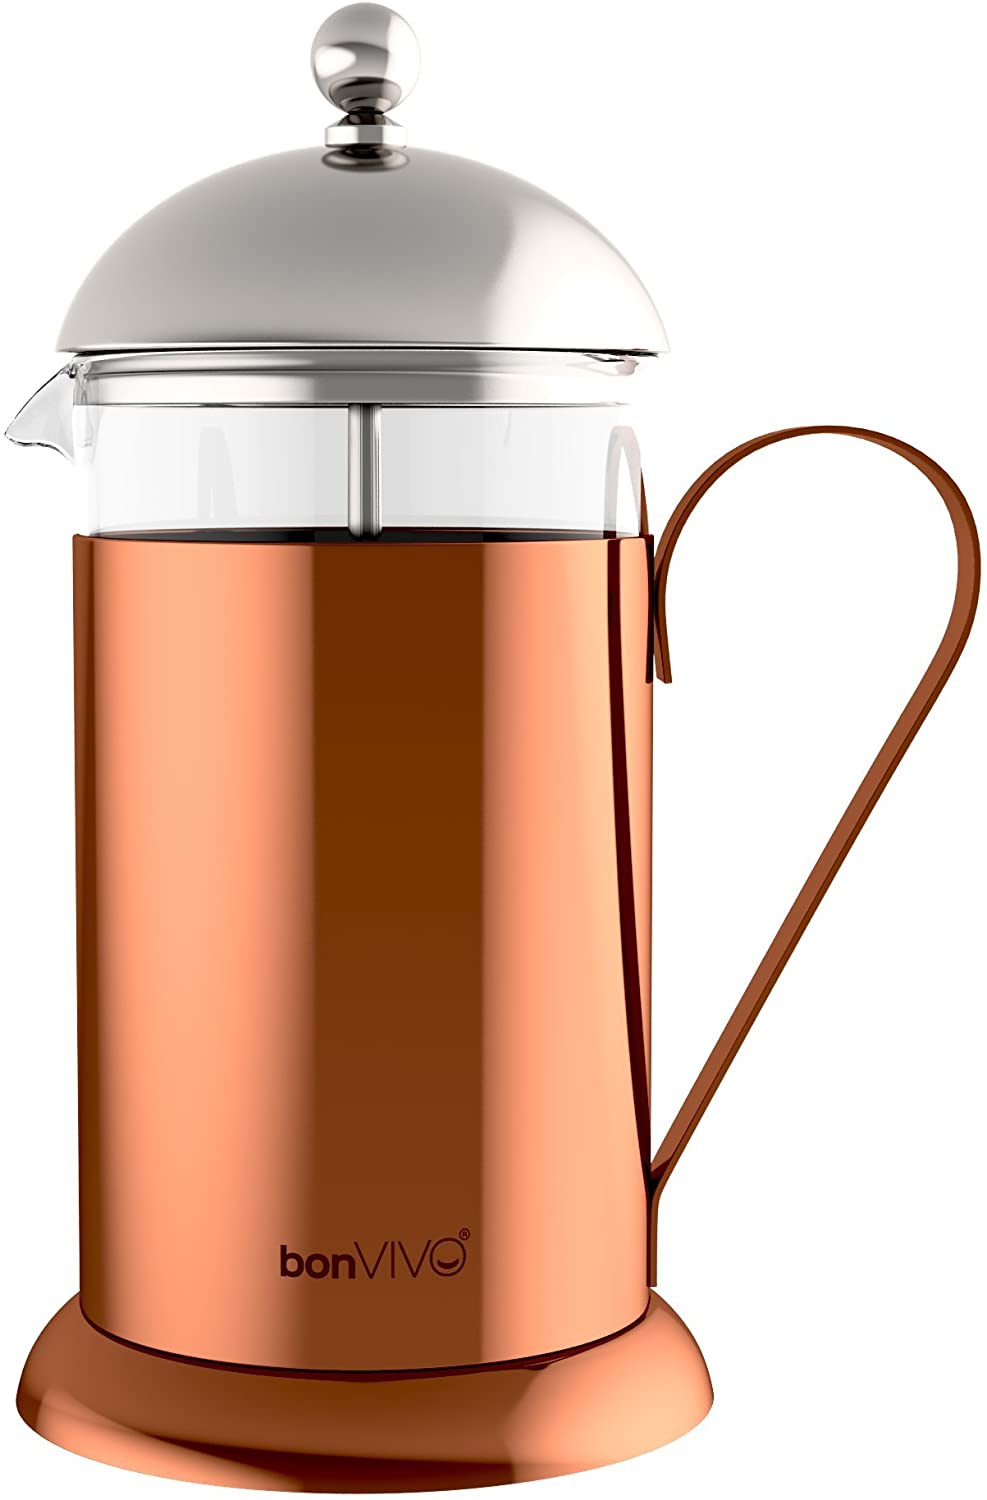 Bonvivo® Taro Gaze II – Coffee Maker French Press In Copper Chrome Finish Stainless Steel and Glass, with Filter, Small, 035L 3 Cup/350ml)